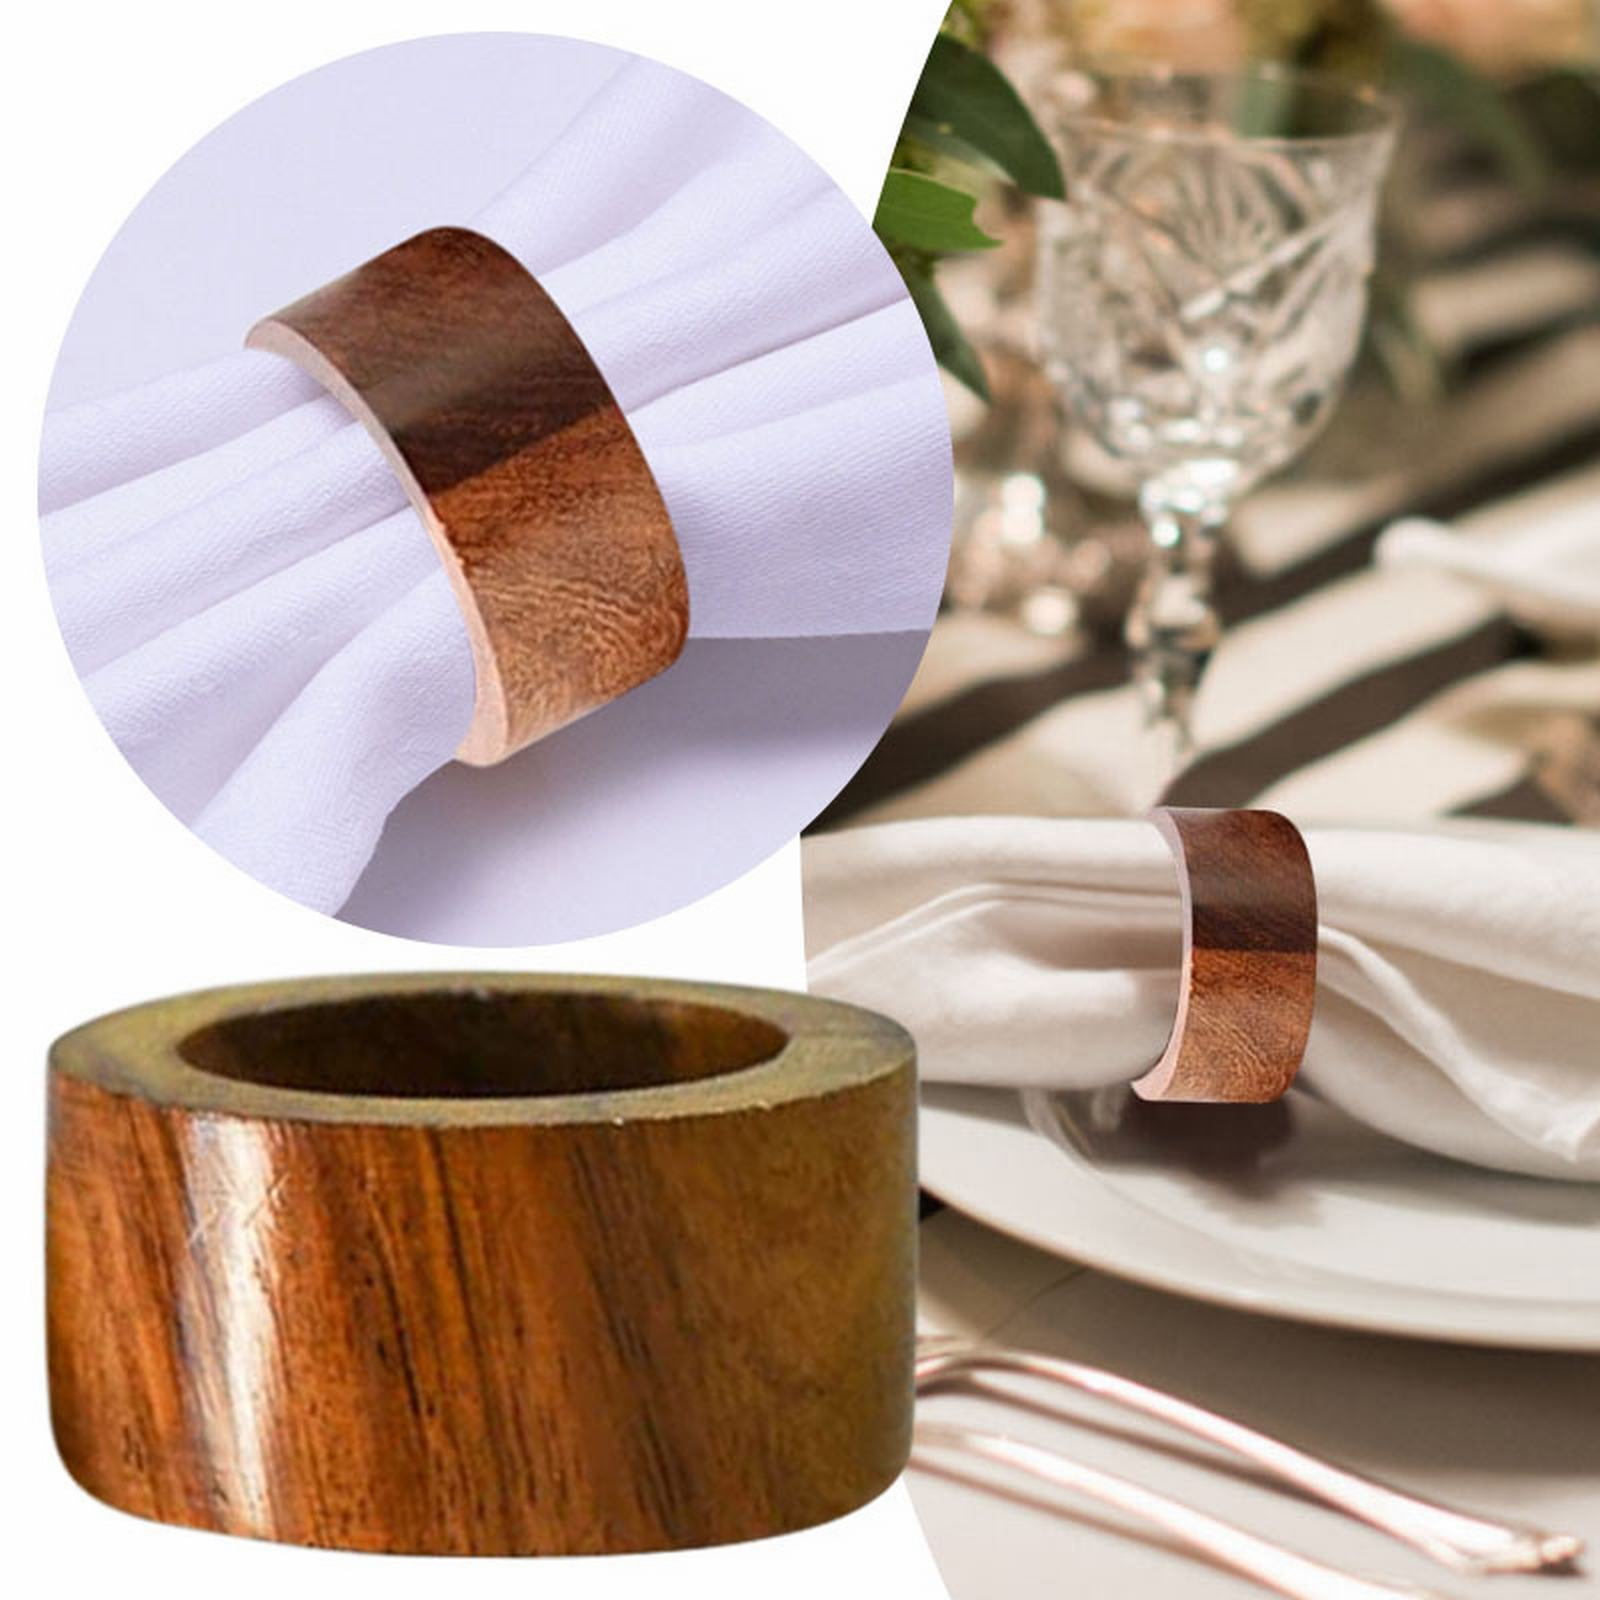 Pjtewawe Kitchen Essentials Napkin Ring Wooden Towel Ring Wooden Wood Bead  Wood Table Decoration